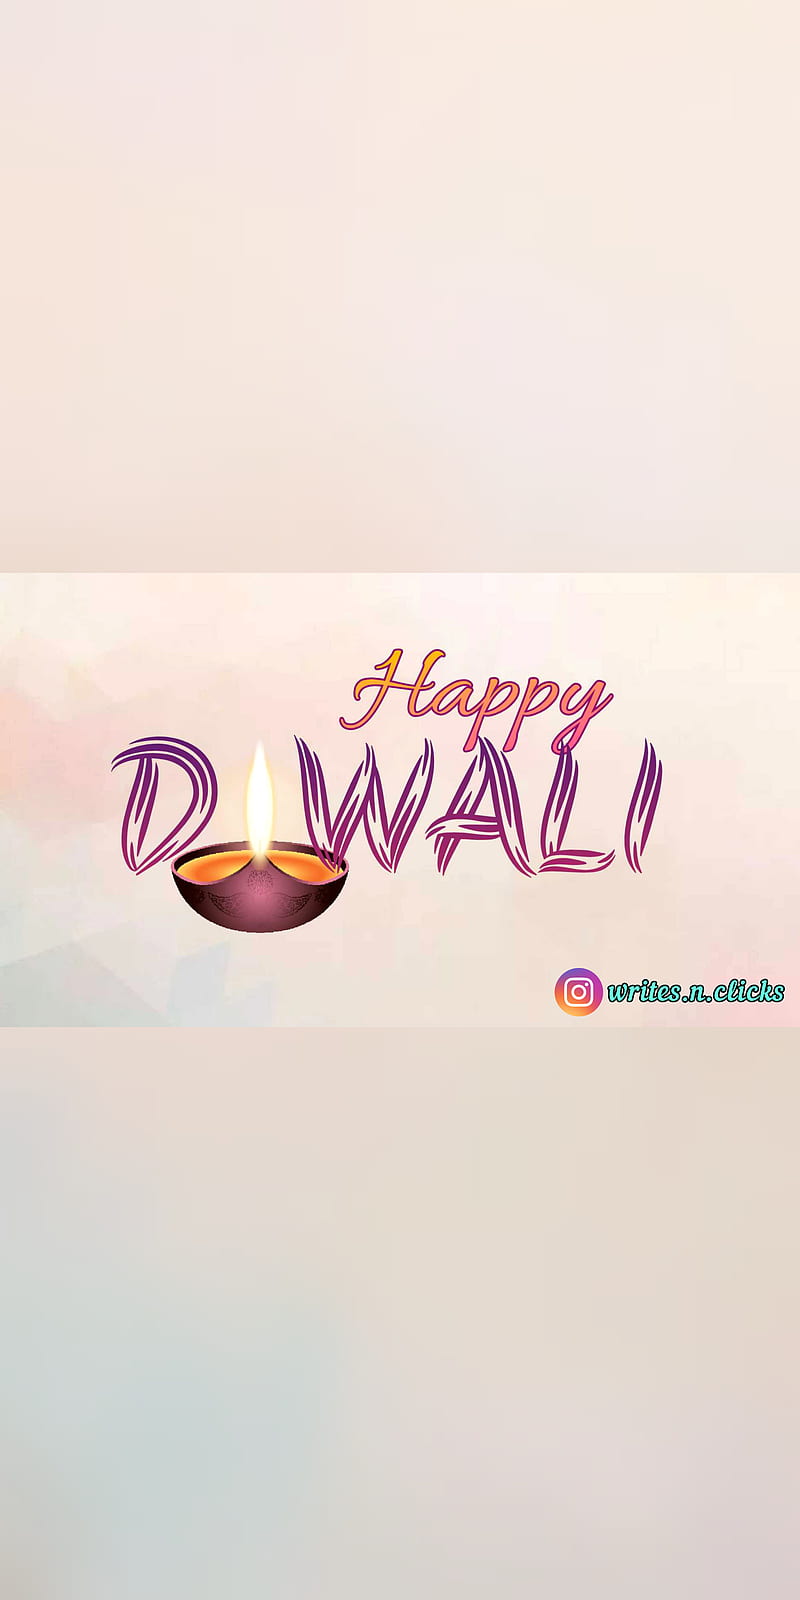 Happy Diwali, crackers, festival, festival of lights, iphone, lights, lord ram, thankful, wishes, HD phone wallpaper